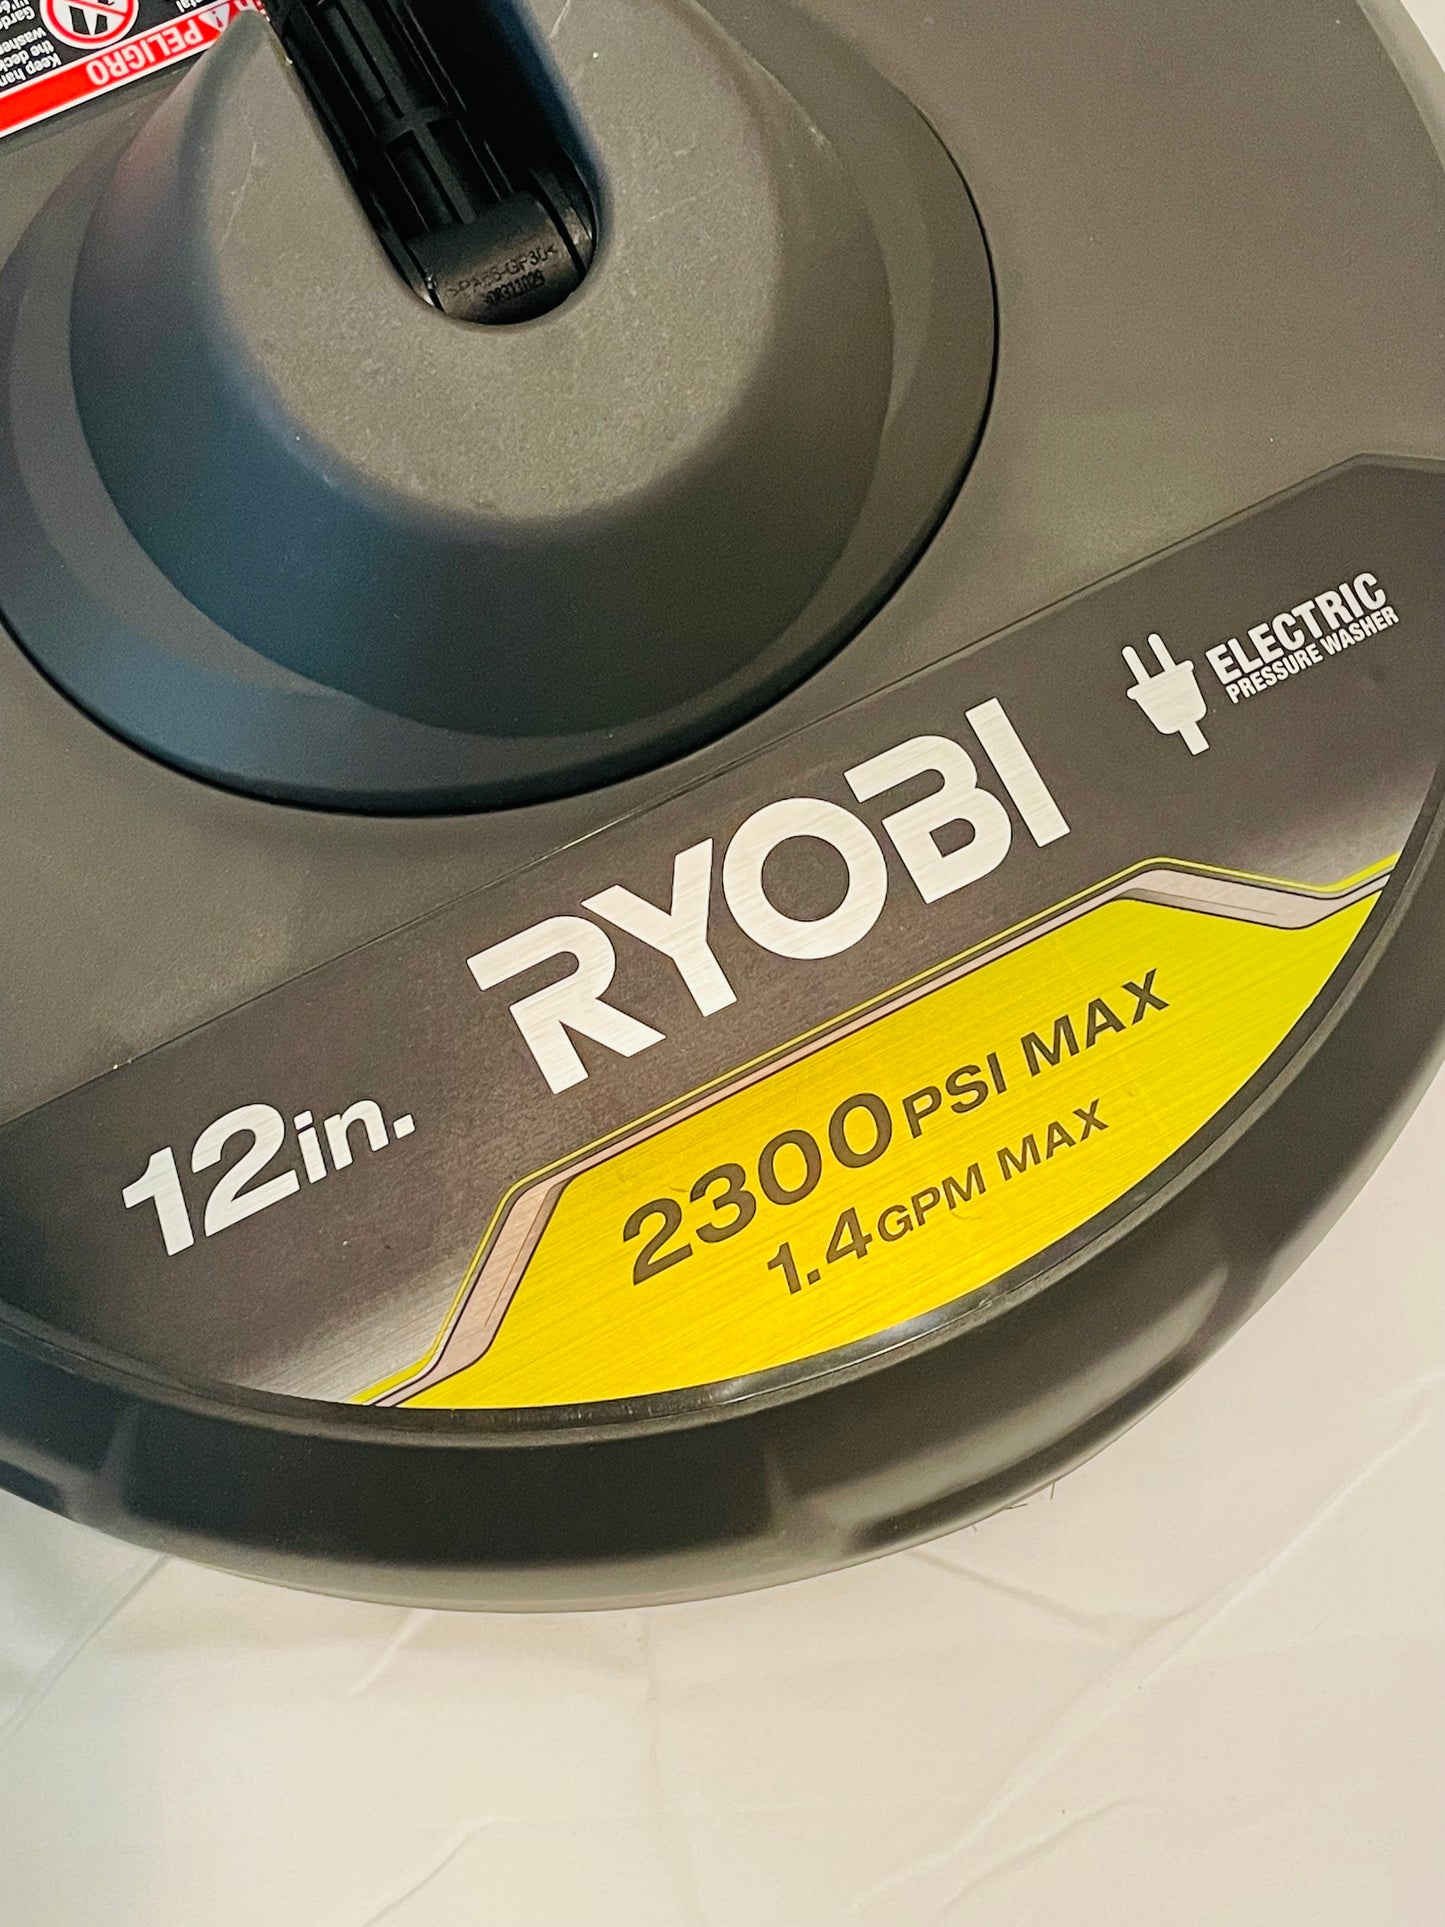 RYOBI 12 in. 2300 PSI Electric Pressure Washer Surface Cleaner